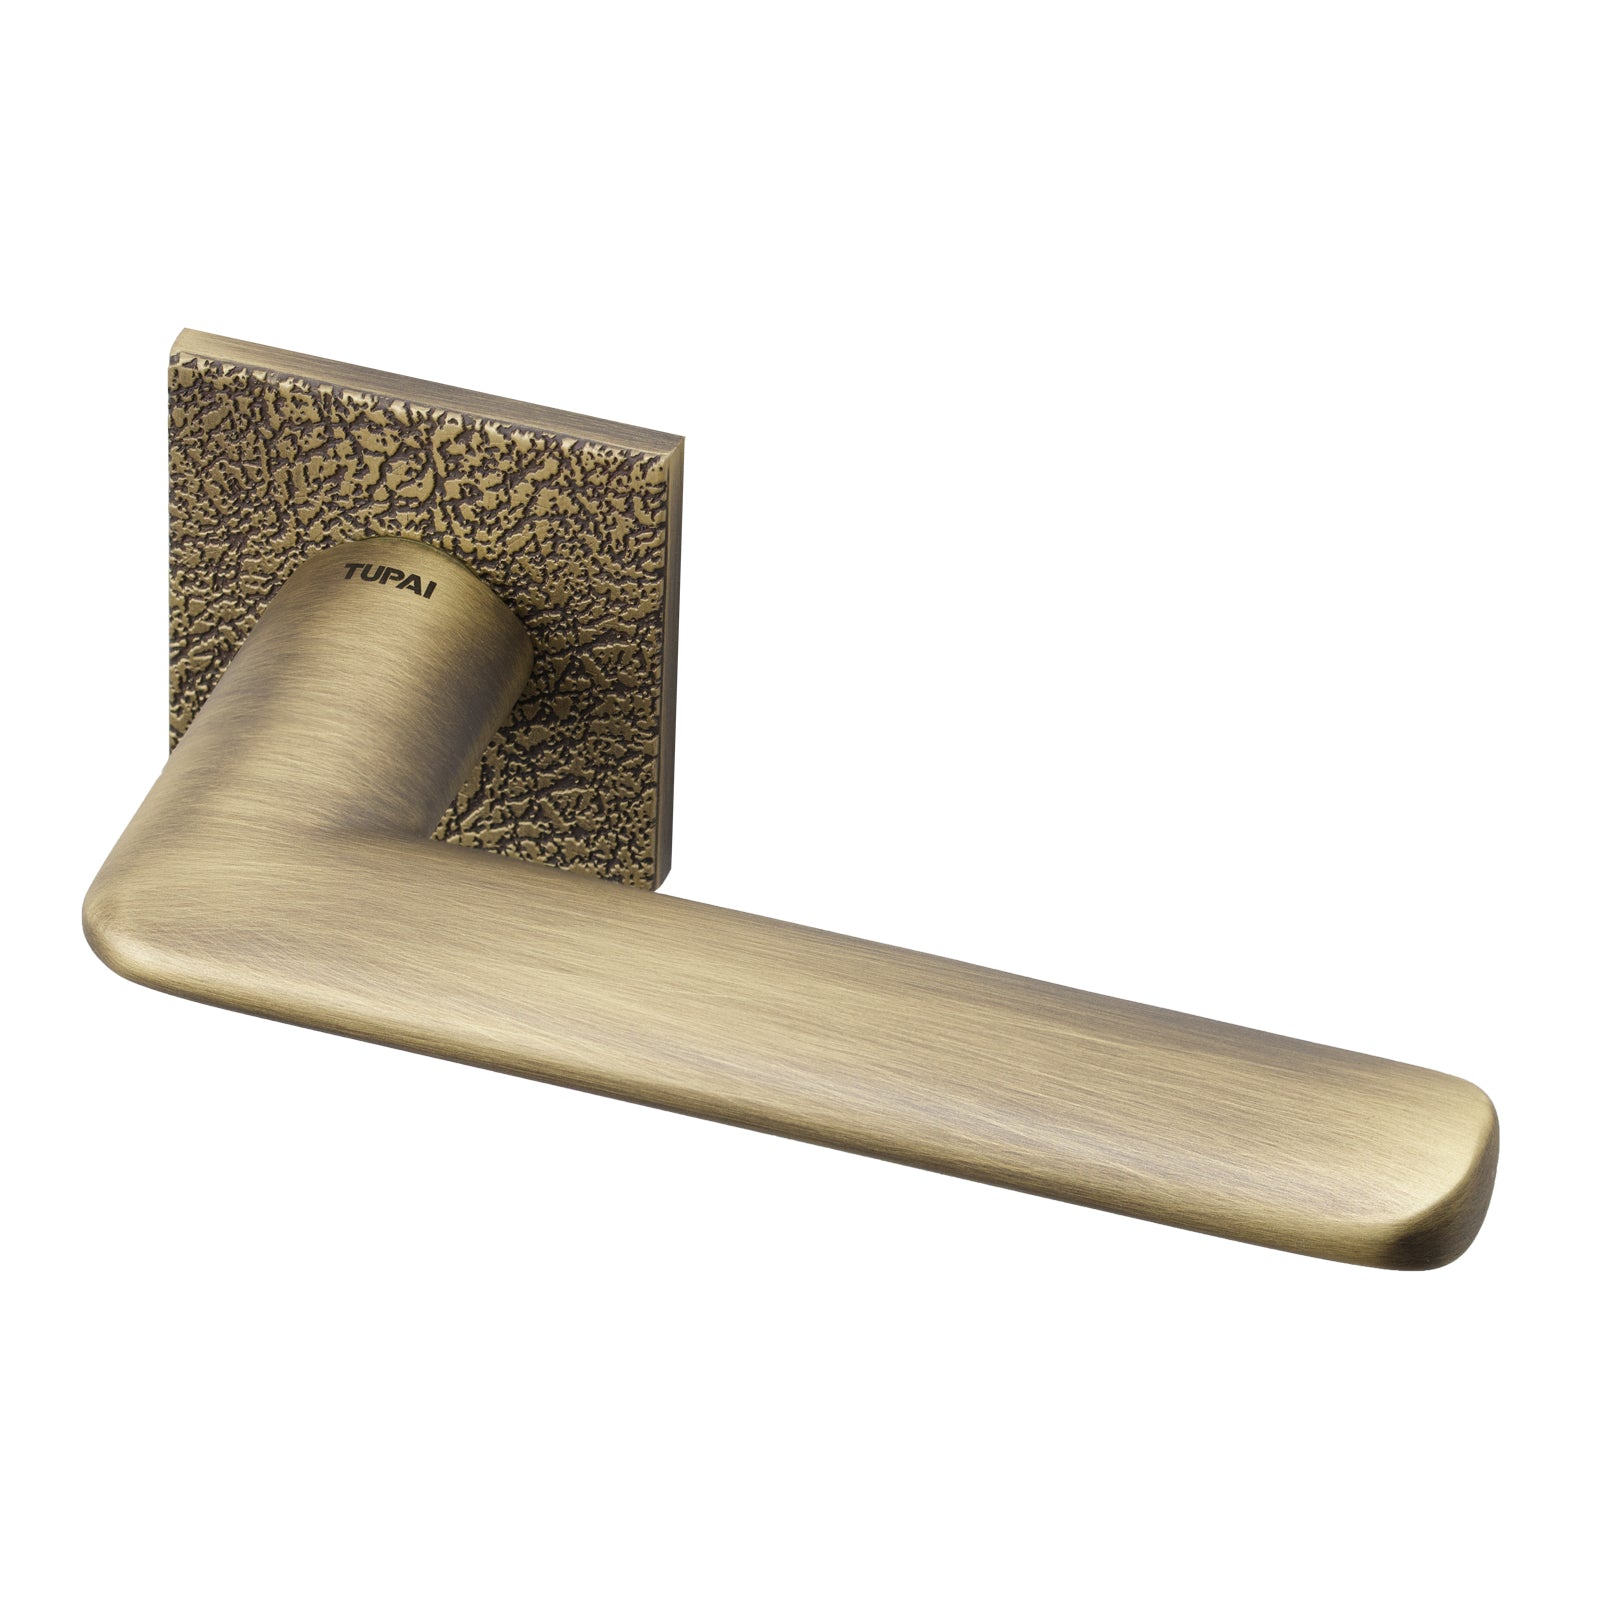 Edral Leather Texture Lever on Rose Door Handle in Antique Brass Finish SHOW